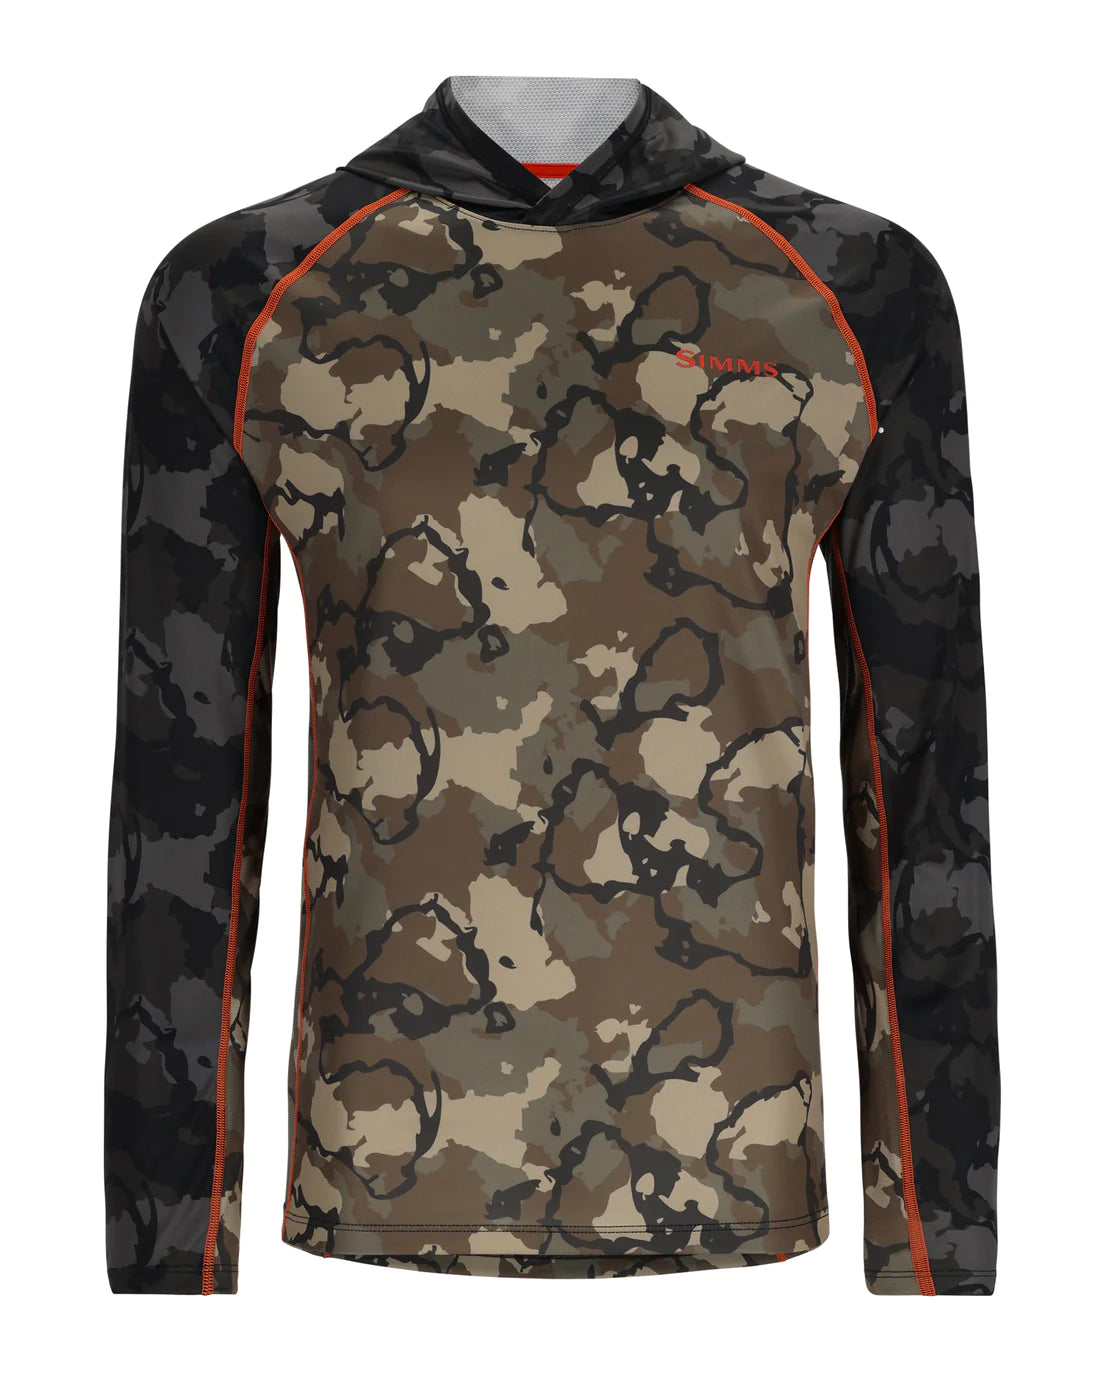 Simms Challenger Jacket Regiment Camo Oliv Drb M M, Categories \ Fly Fishing  Clothing \ Fishing Jackets